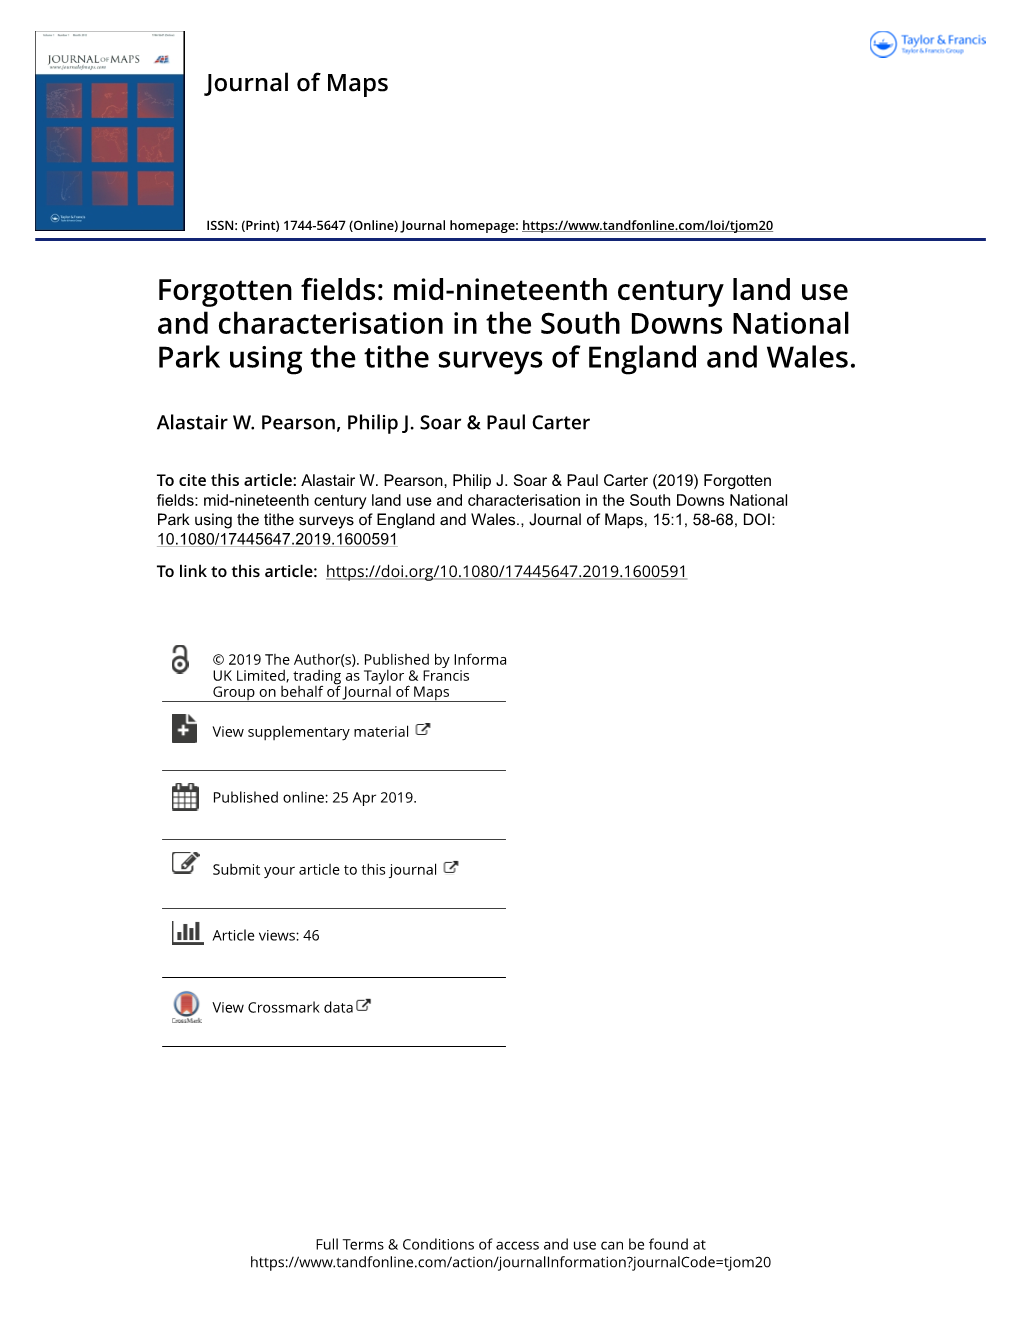 Forgotten Fields: Mid-Nineteenth Century Land Use and Characterisation in the South Downs National Park Using the Tithe Surveys of England and Wales